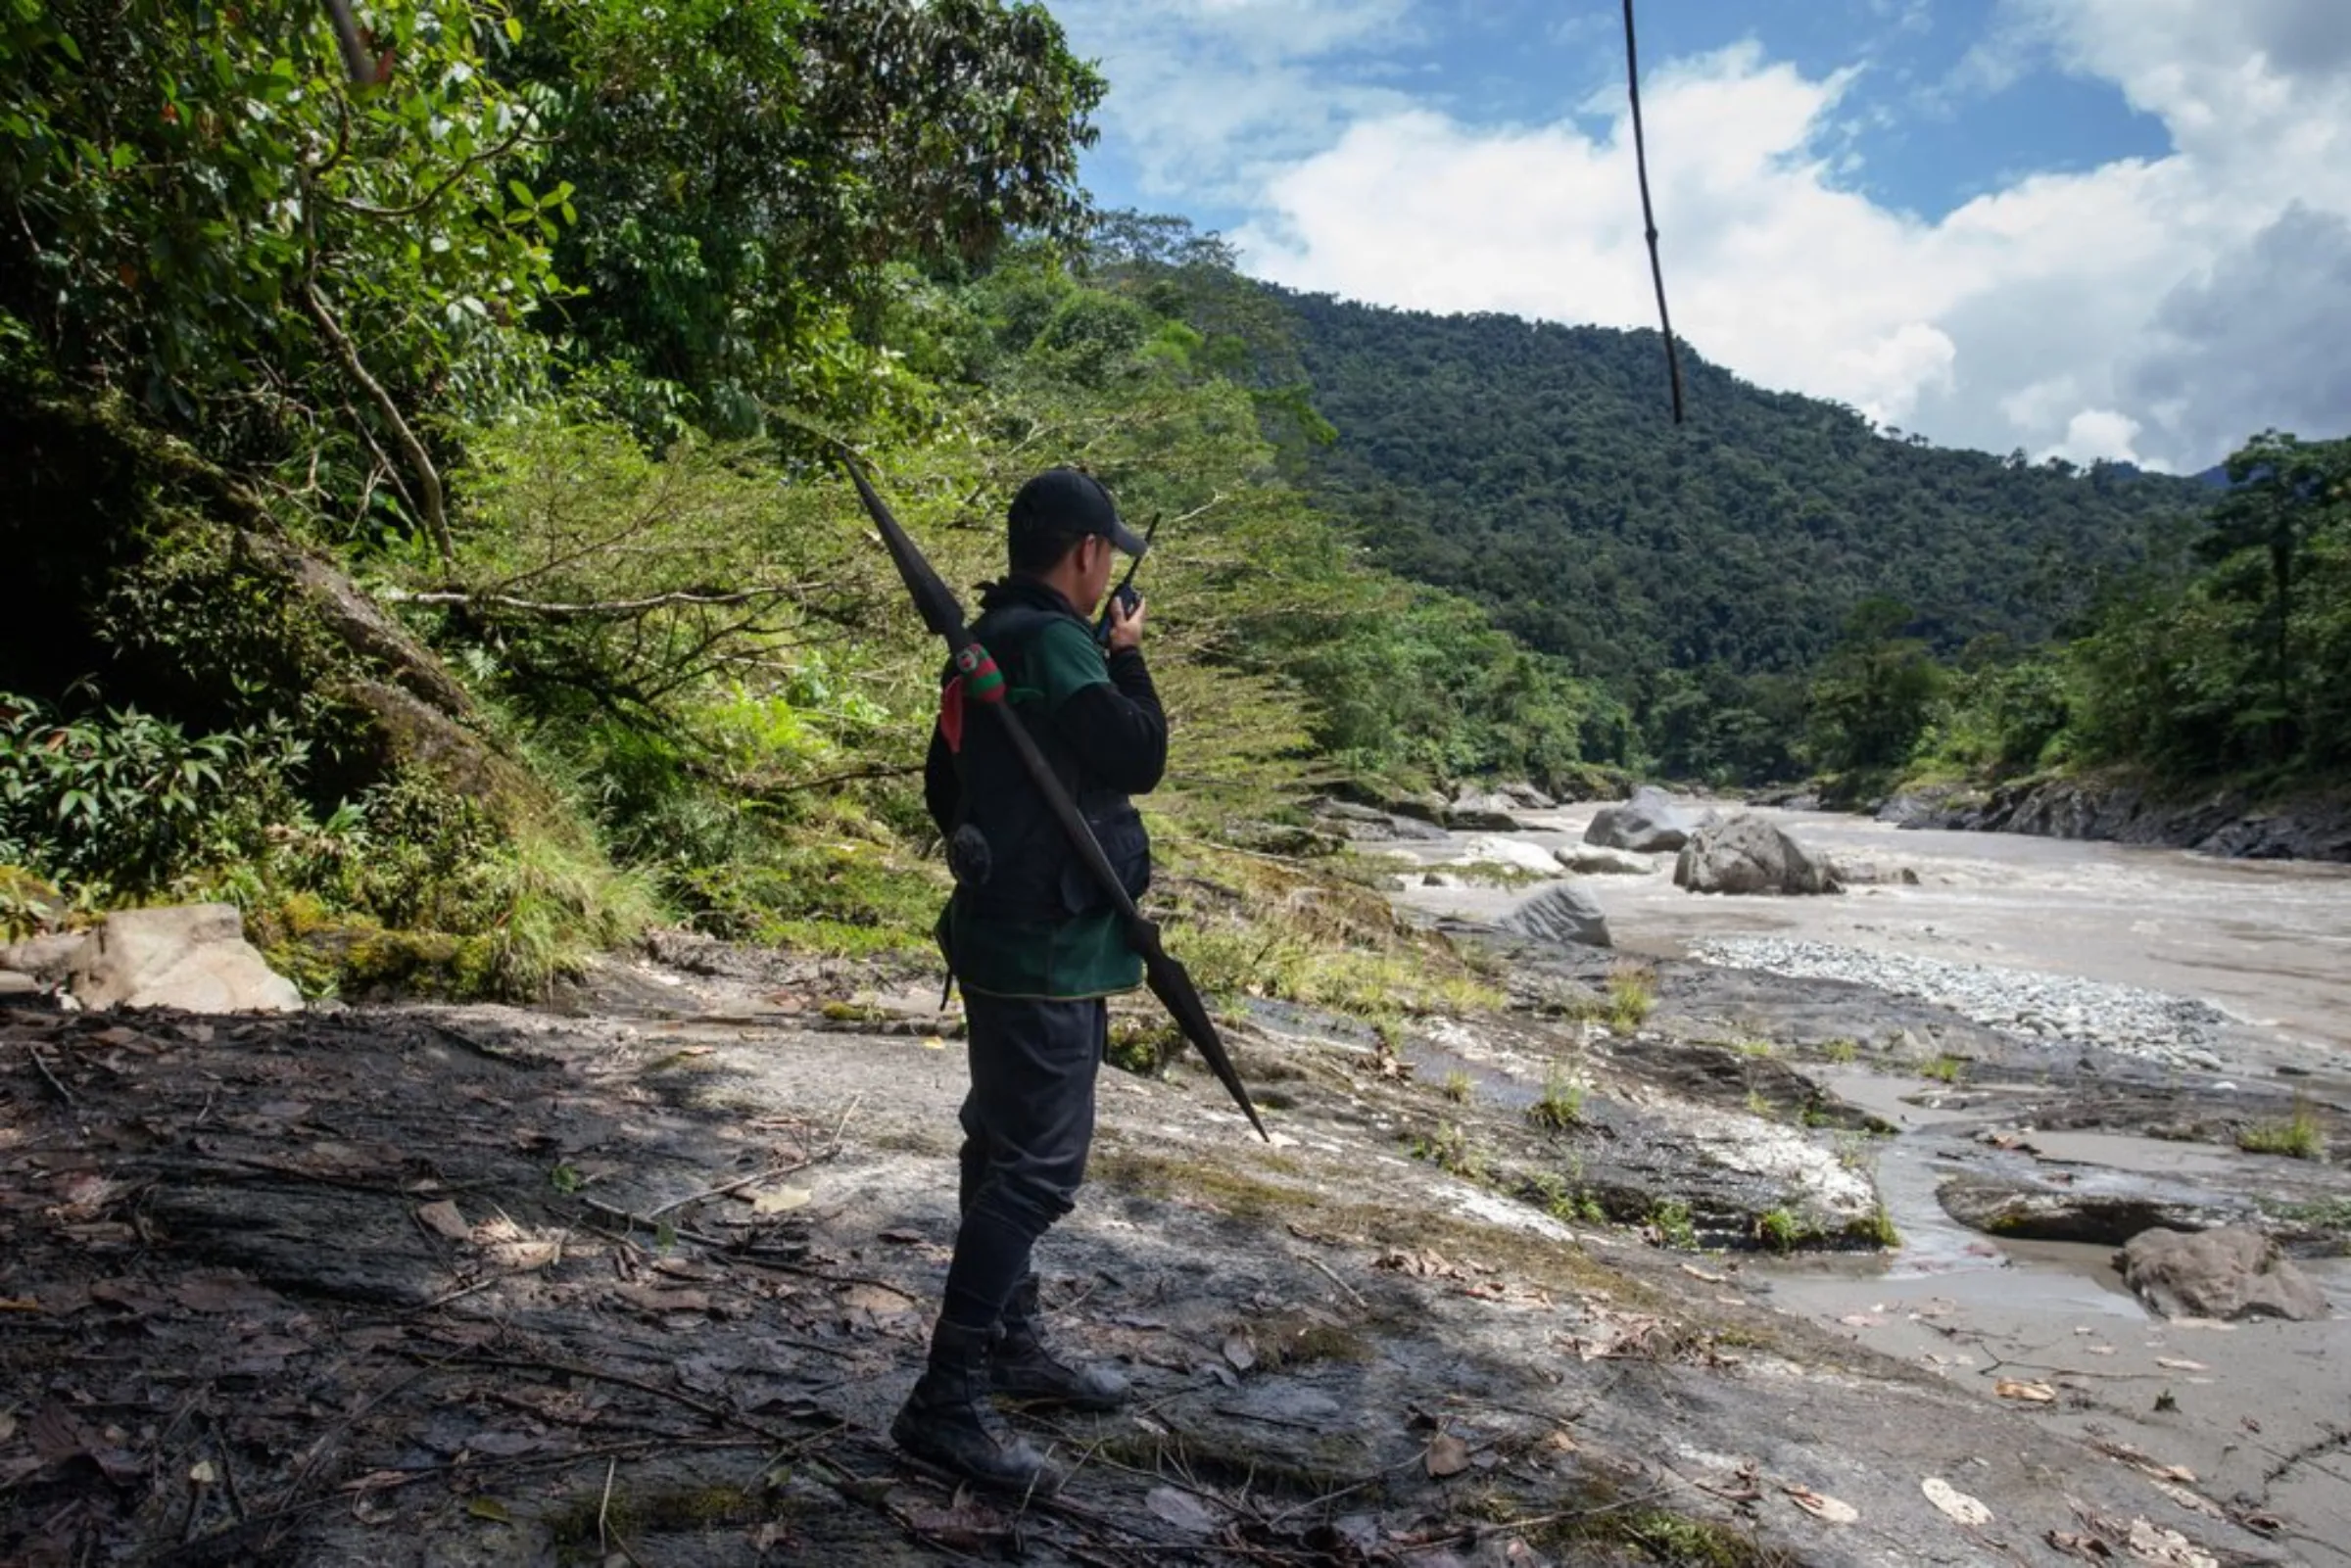 Marcelo Lucitante, a member of the Cofan indigenous guard, speaks on a radio while on patrol on the banks of the Aguarico River in northern Ecuador near their village of Sinangoe, on April 21, 2022